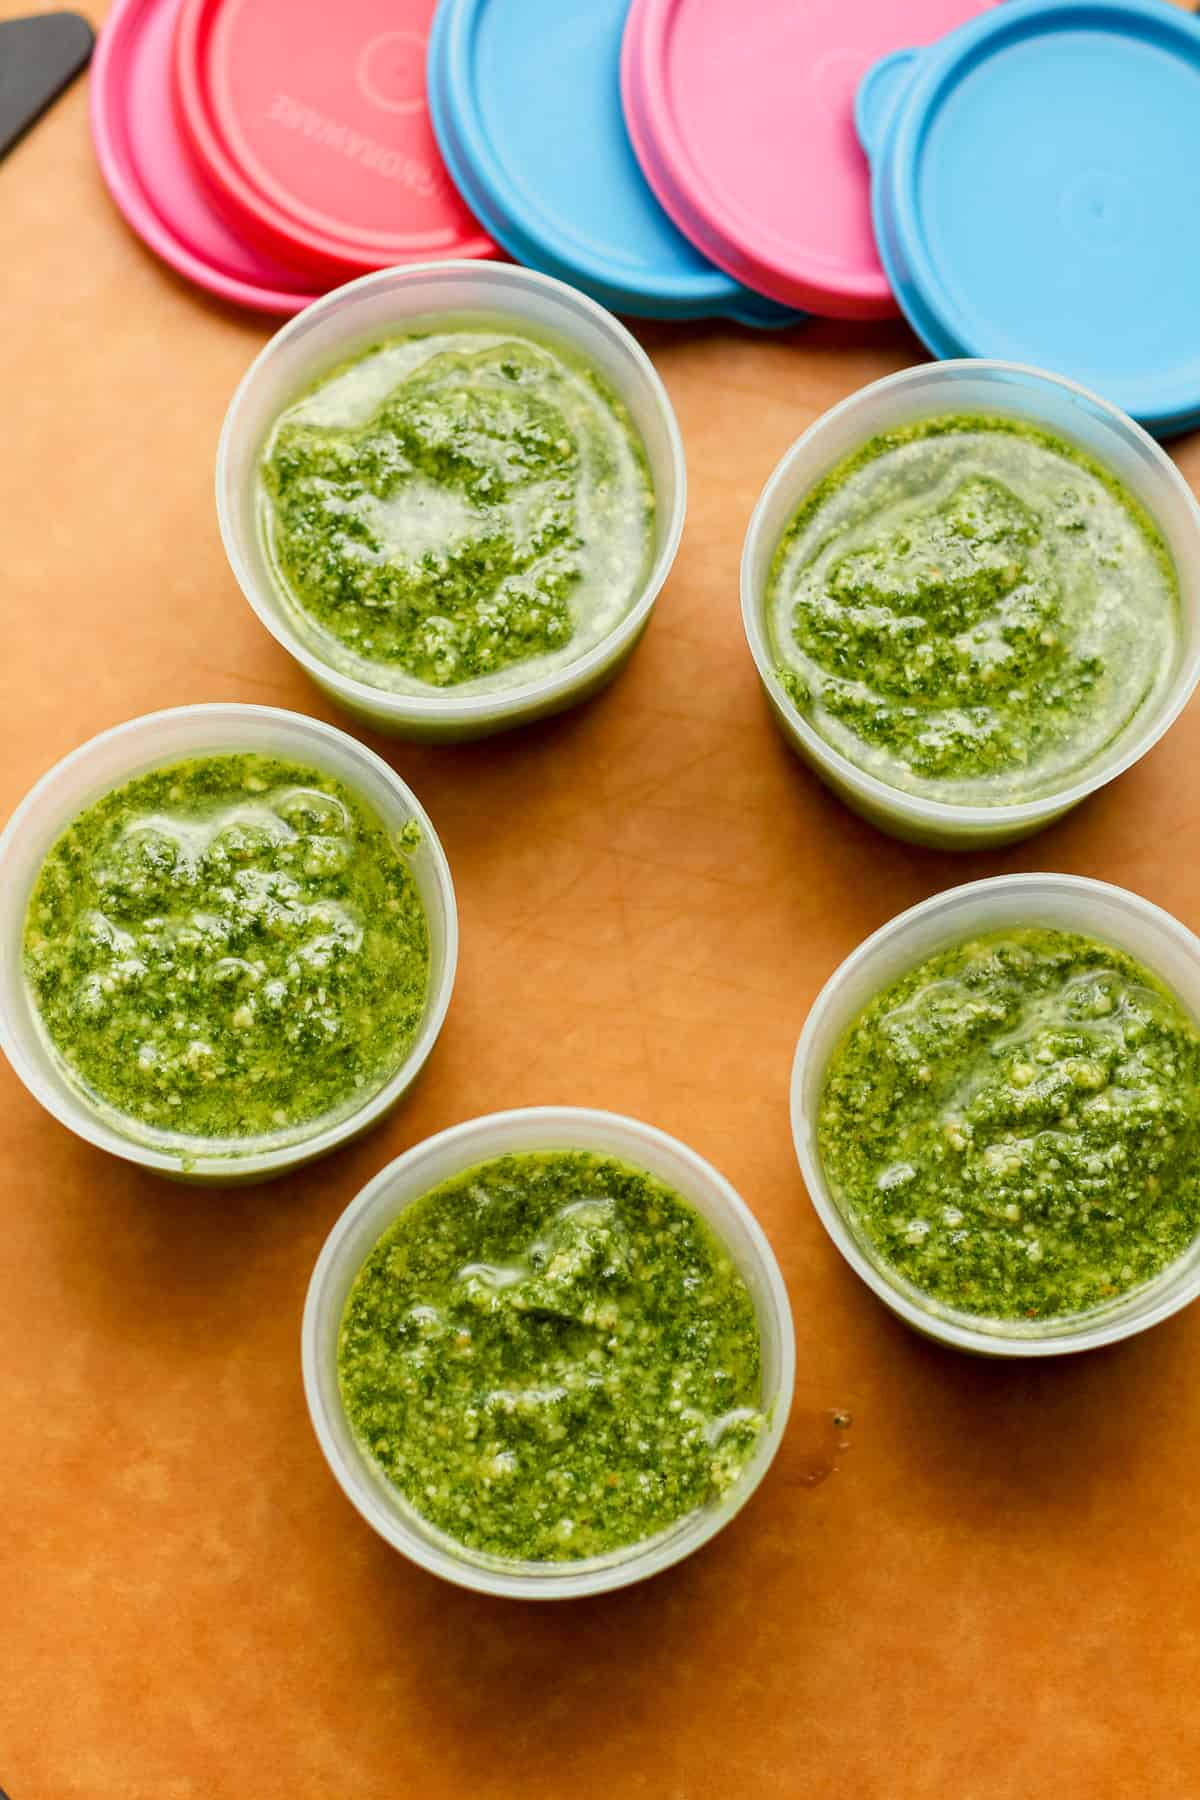 Five small containers of just made homemade pesto sauce.